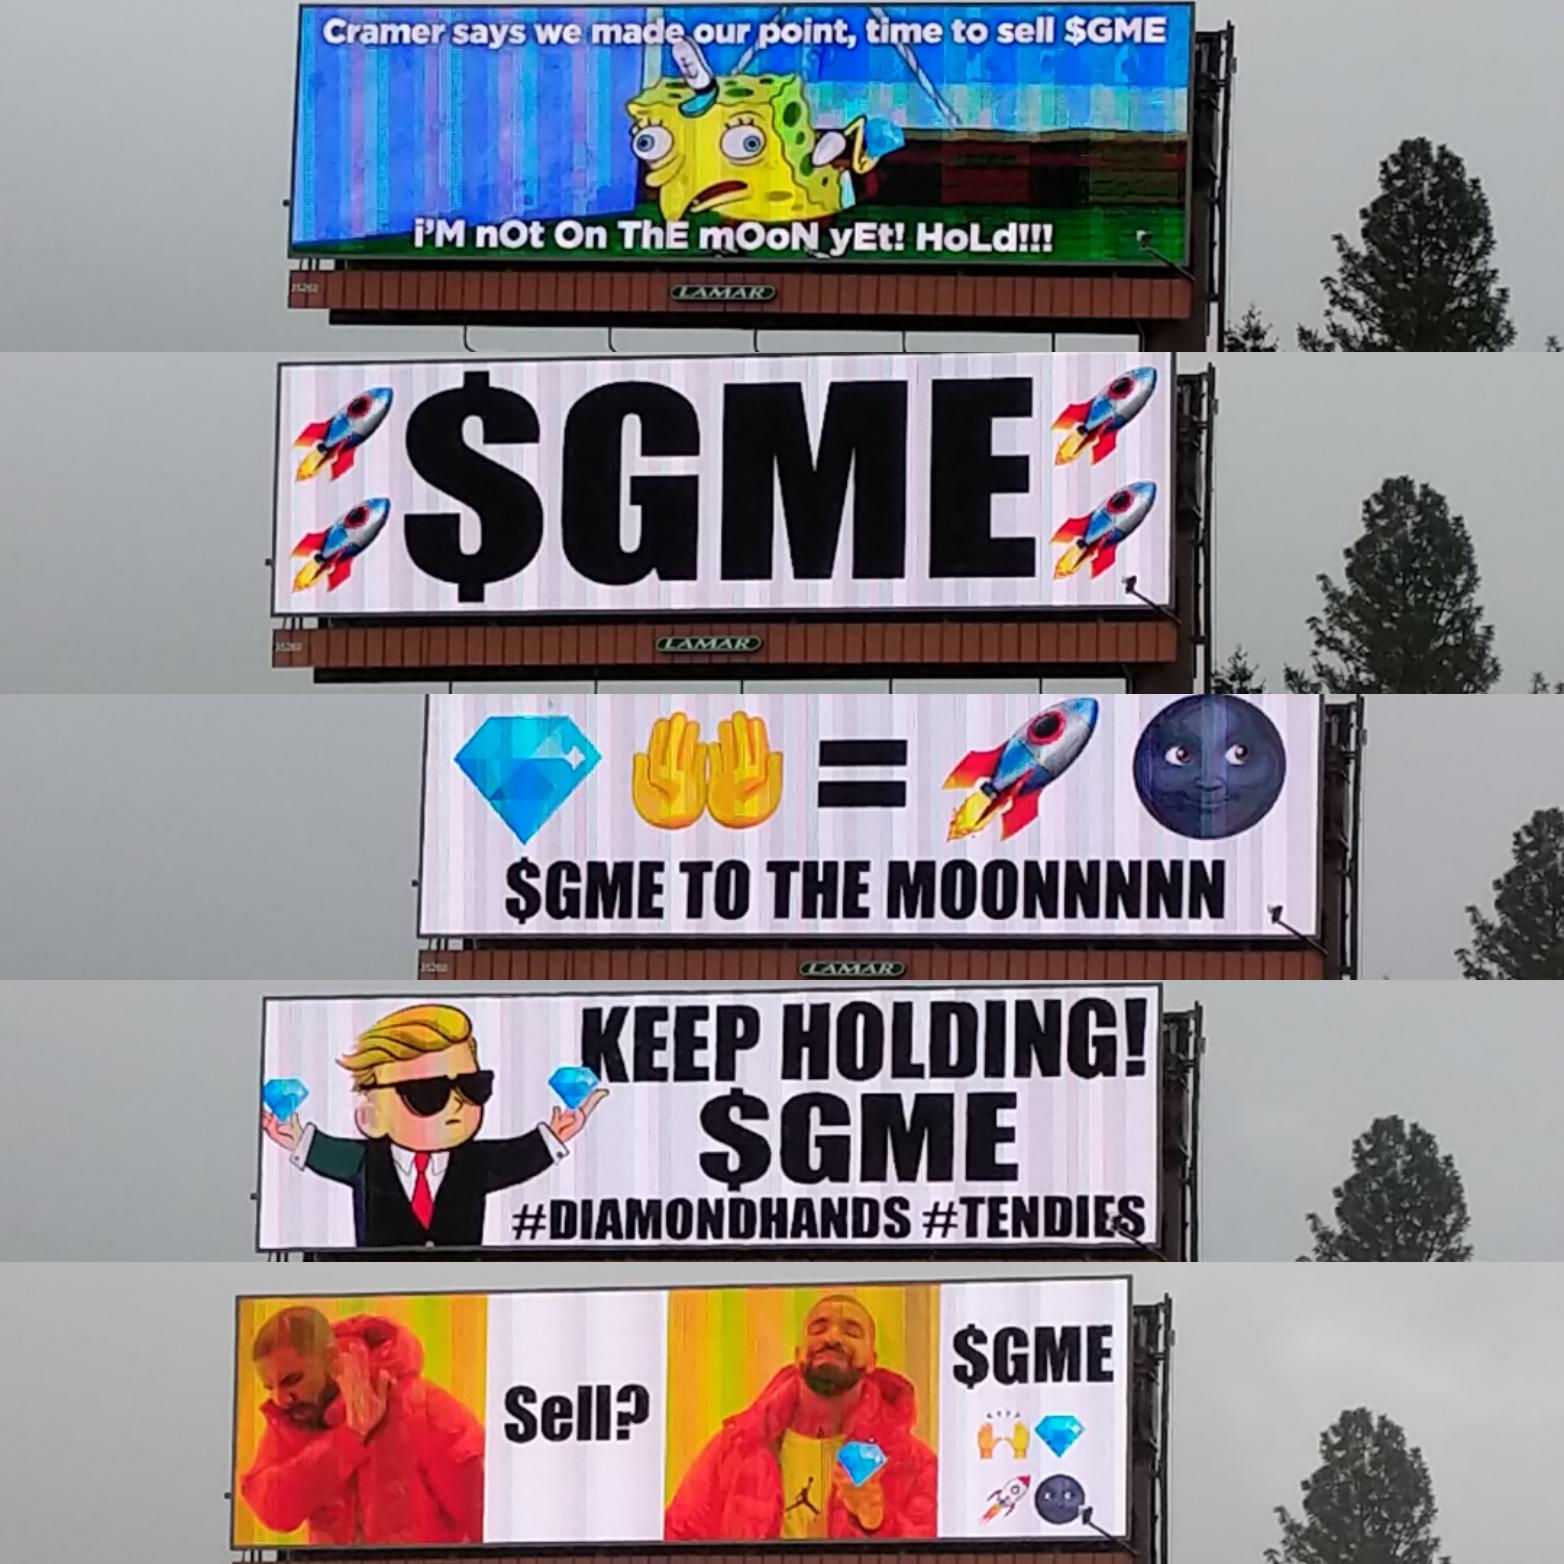 display advertising - Cramer says we made our point, time to sell $Gme I'M nOt On The moon yEt! HoLd!!! Lamar Sgme Lamar 09 $Gme To The Moonnnnn Camaro Keep Holding! $Gme Sgme Sell?